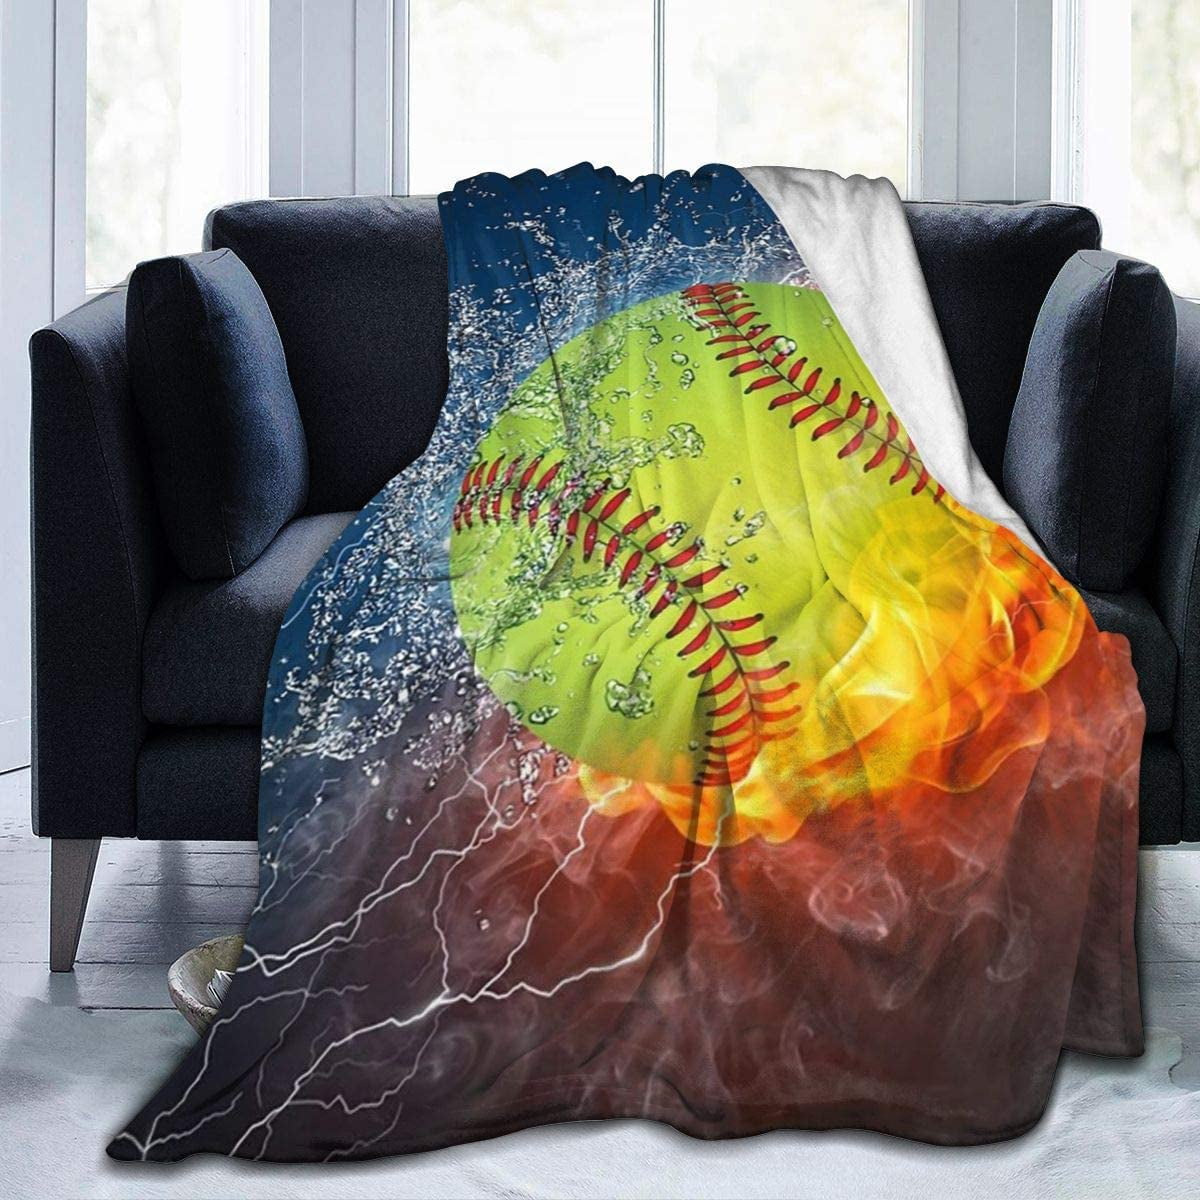 Fire Softball Flannel Fleece Bed Blanket Throw Blanket Lightweight Cozy  Plush Blanket for Bedroom Living Rooms Sofa Couch 50x40 